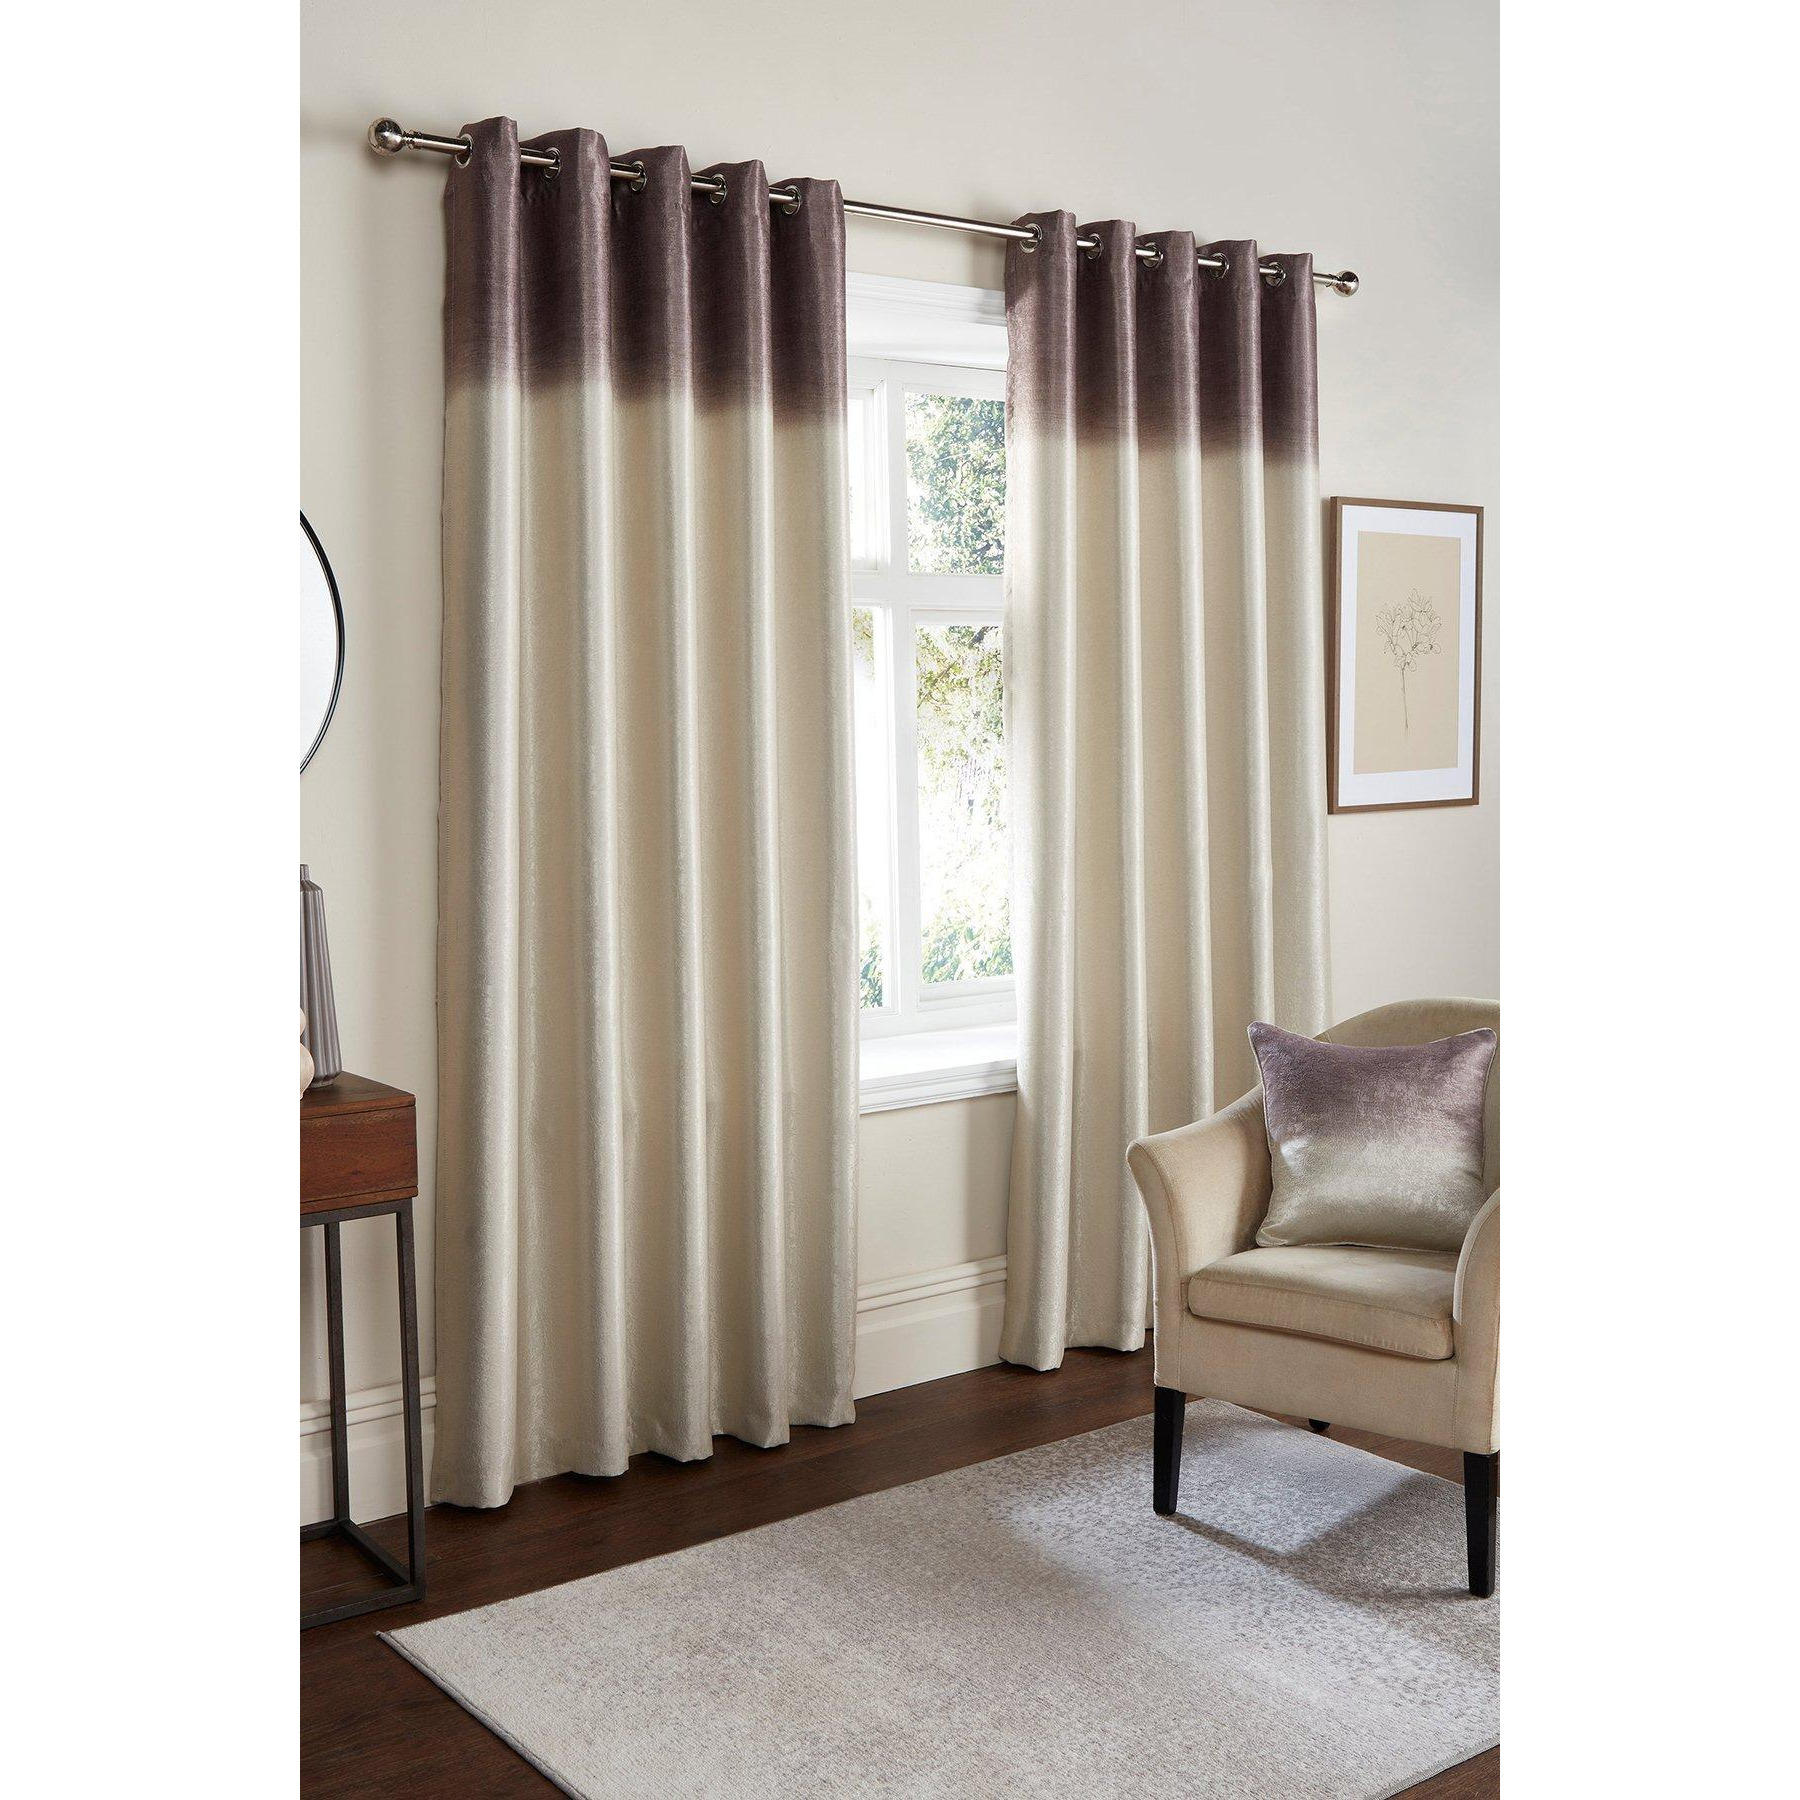 'Ombre Strata' Dim Out Pair of Eyelet Curtains - image 1